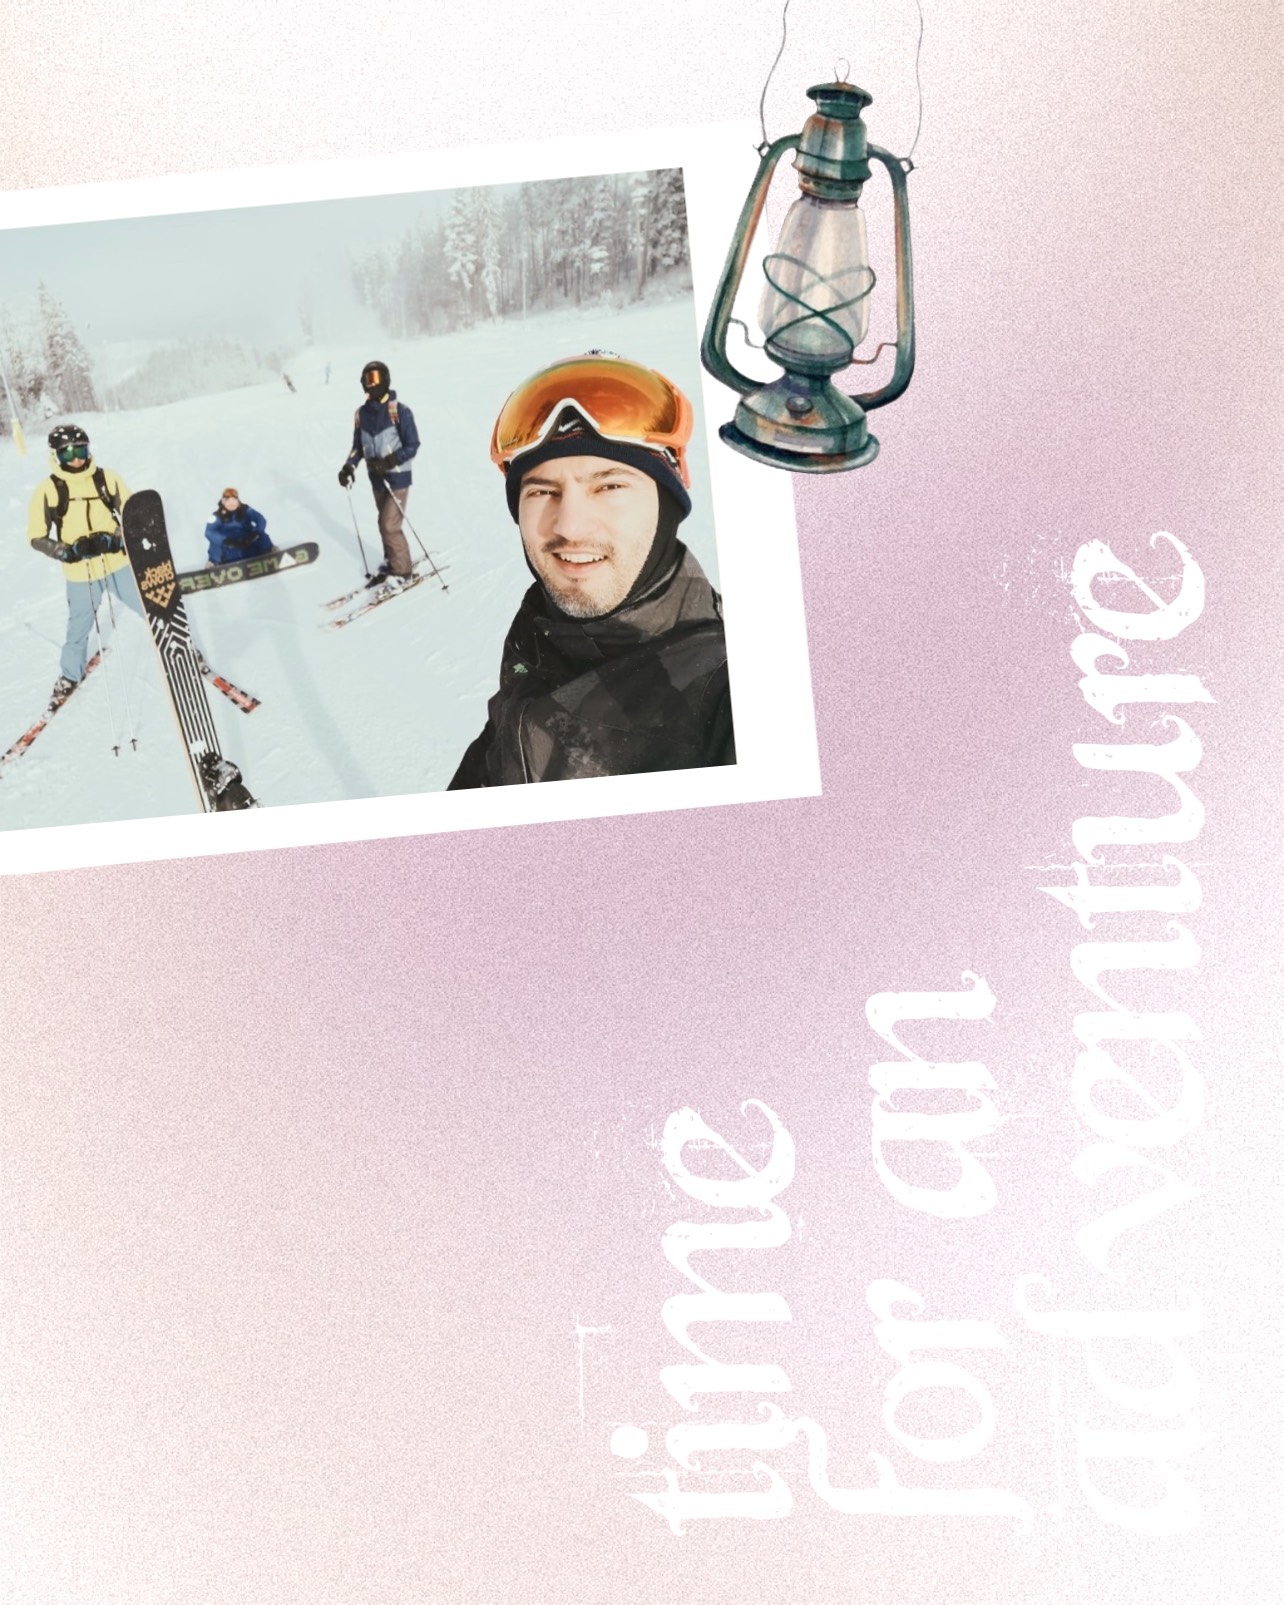 A Picture Of A Man With Skis And A Lantern Winter Wonderland Template